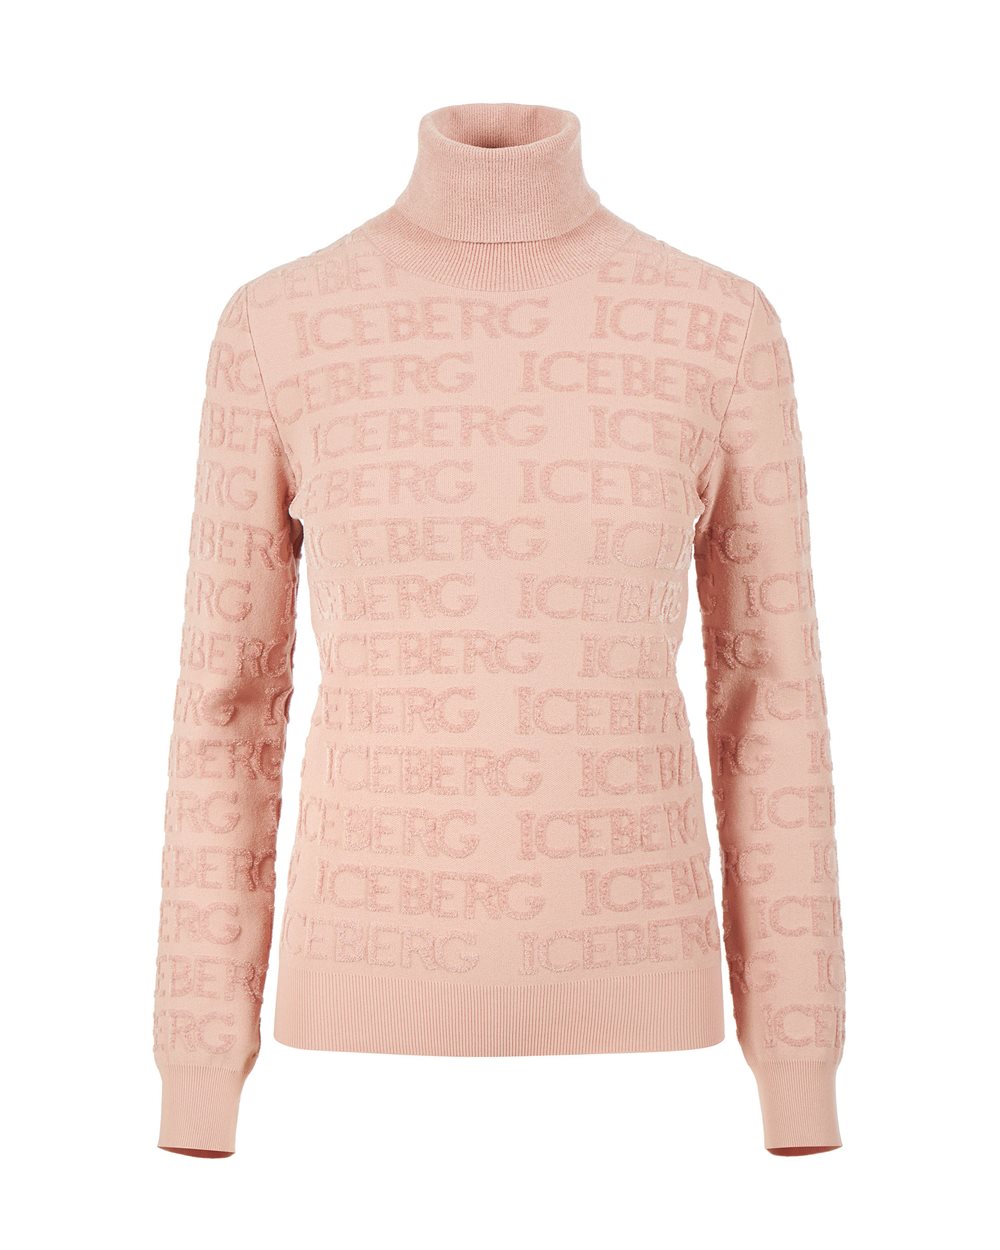 Turtleneck sweater with logo - Woman | Iceberg - Official Website